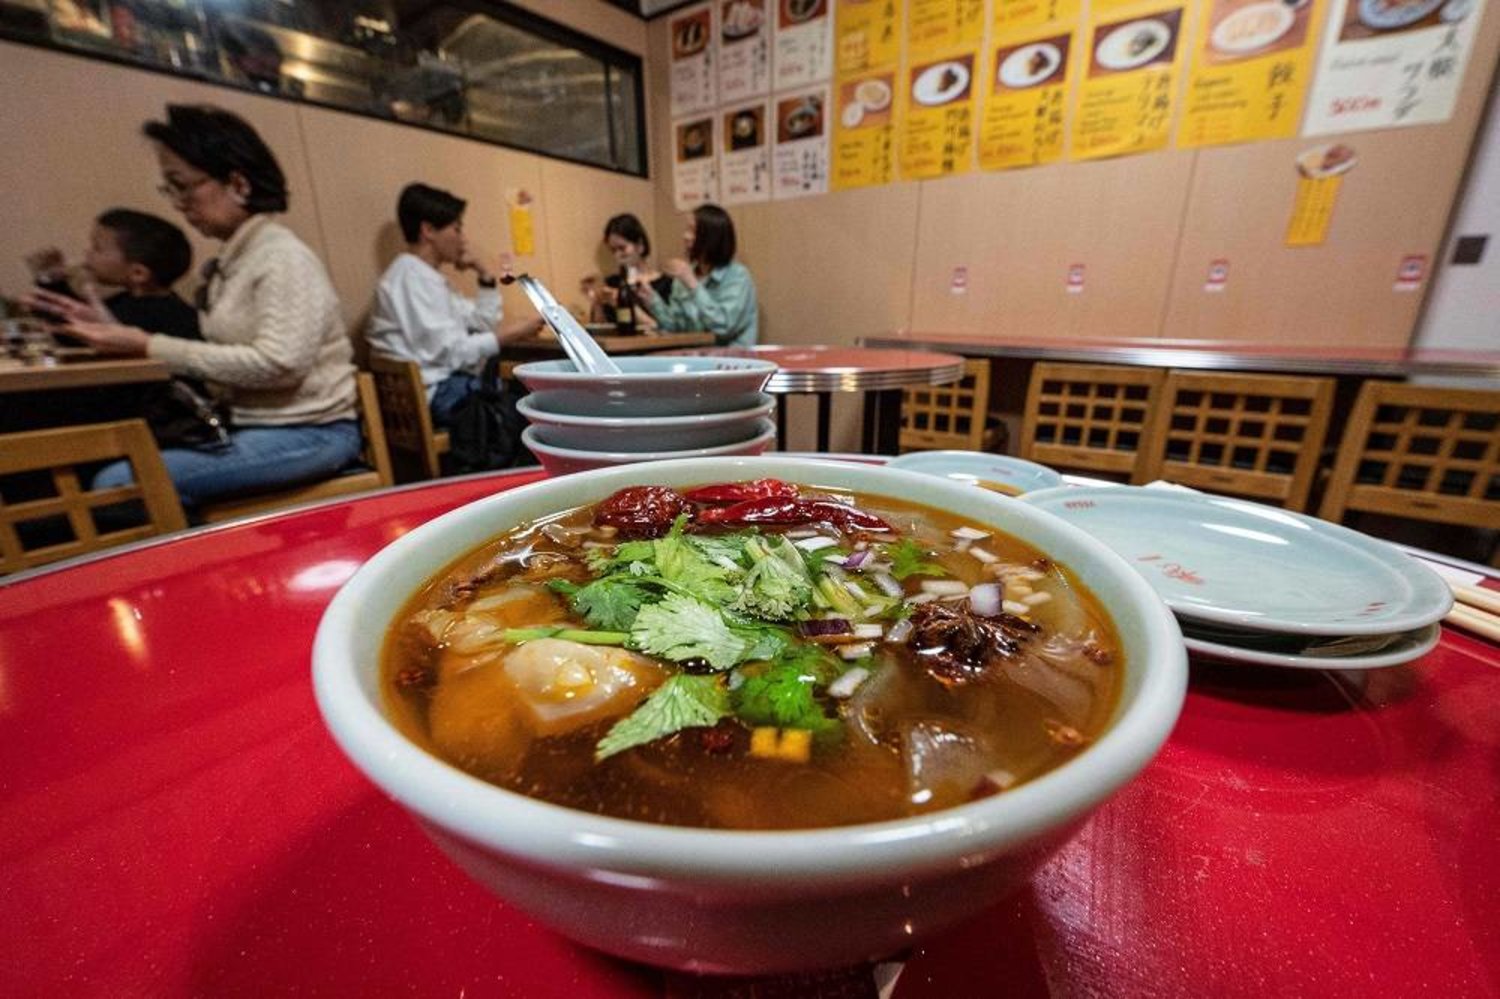 This photo taken on March 20, 2023 shows a dish of spicy glass noodles on a table at the Vegan Izakaya Masaka restaurant in the Shibuya area of Tokyo. (AFP) 